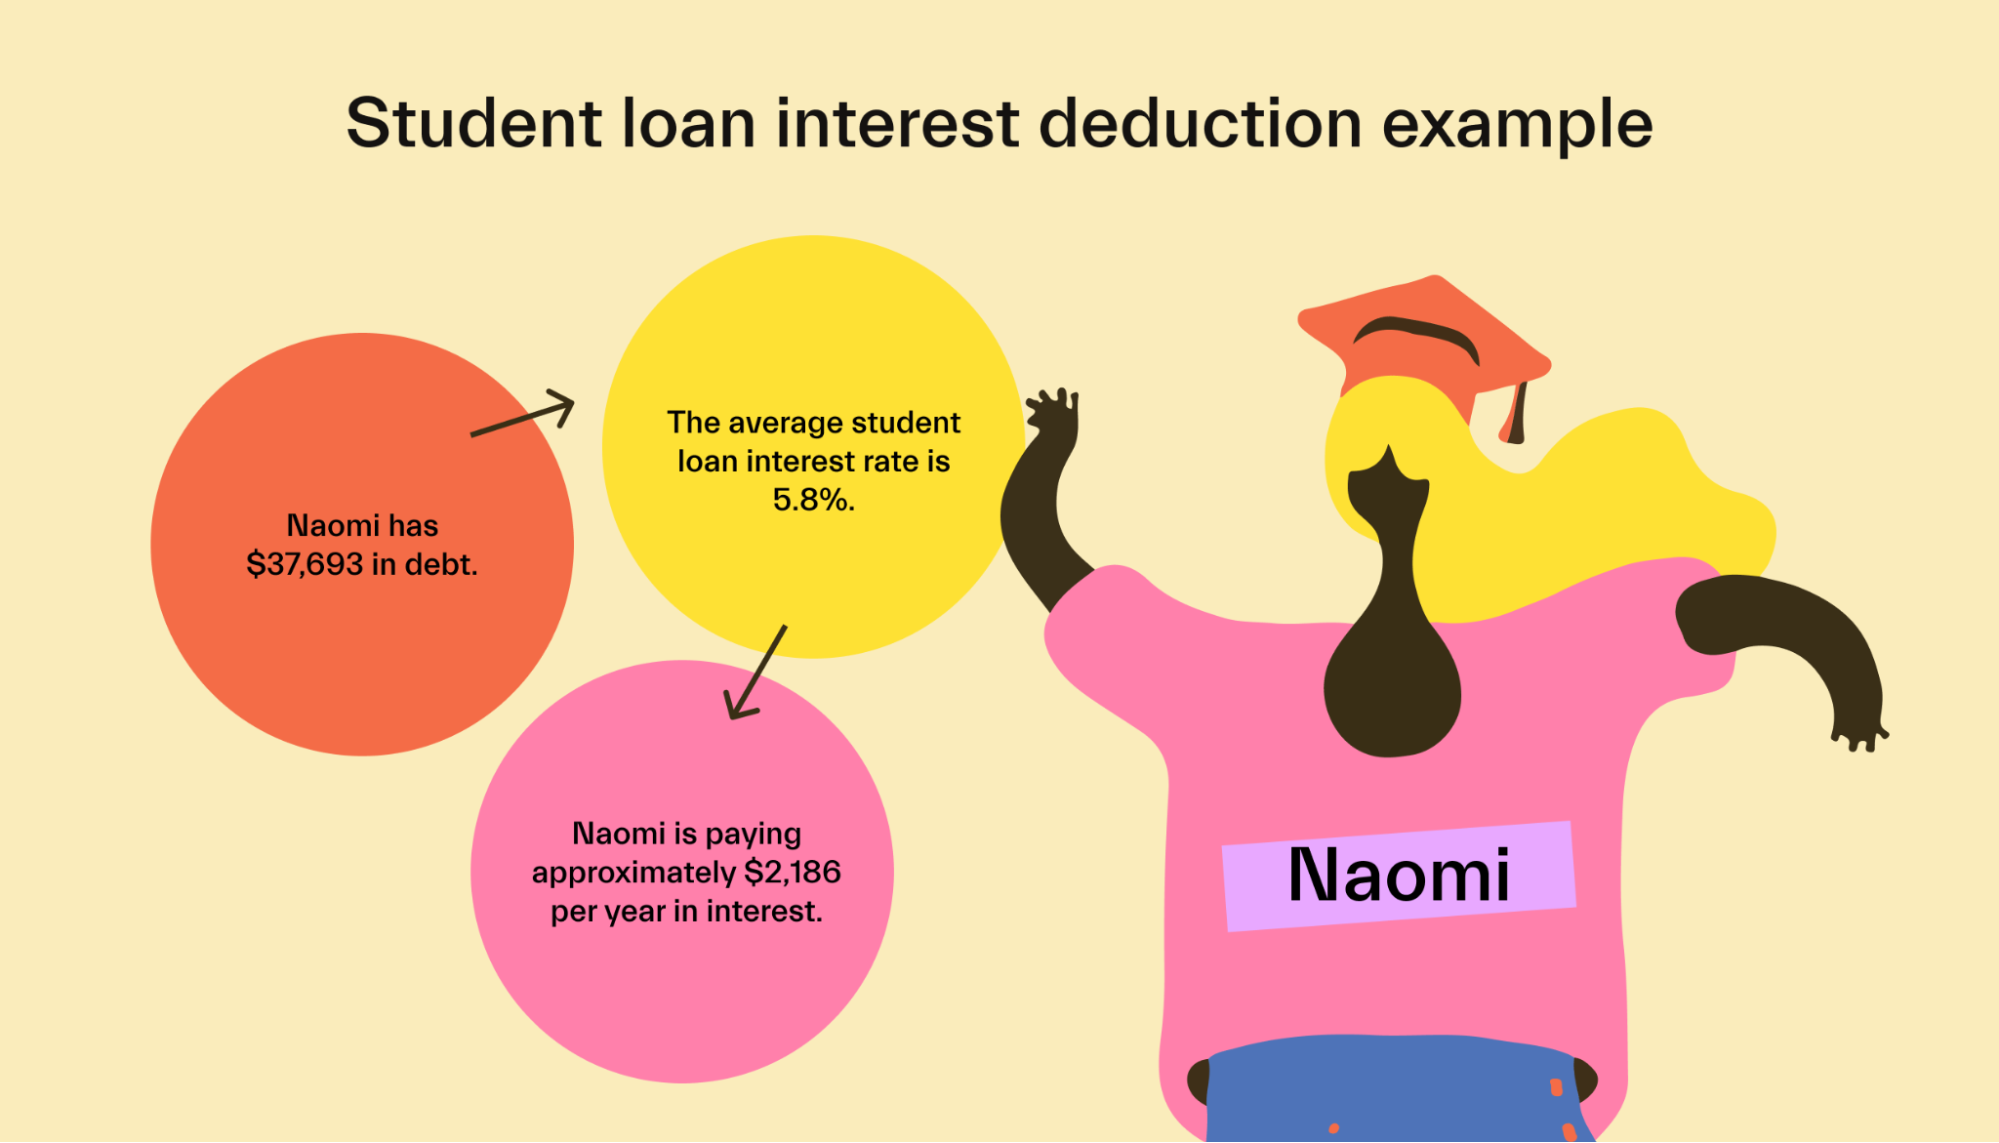 Student loan interest deduction example